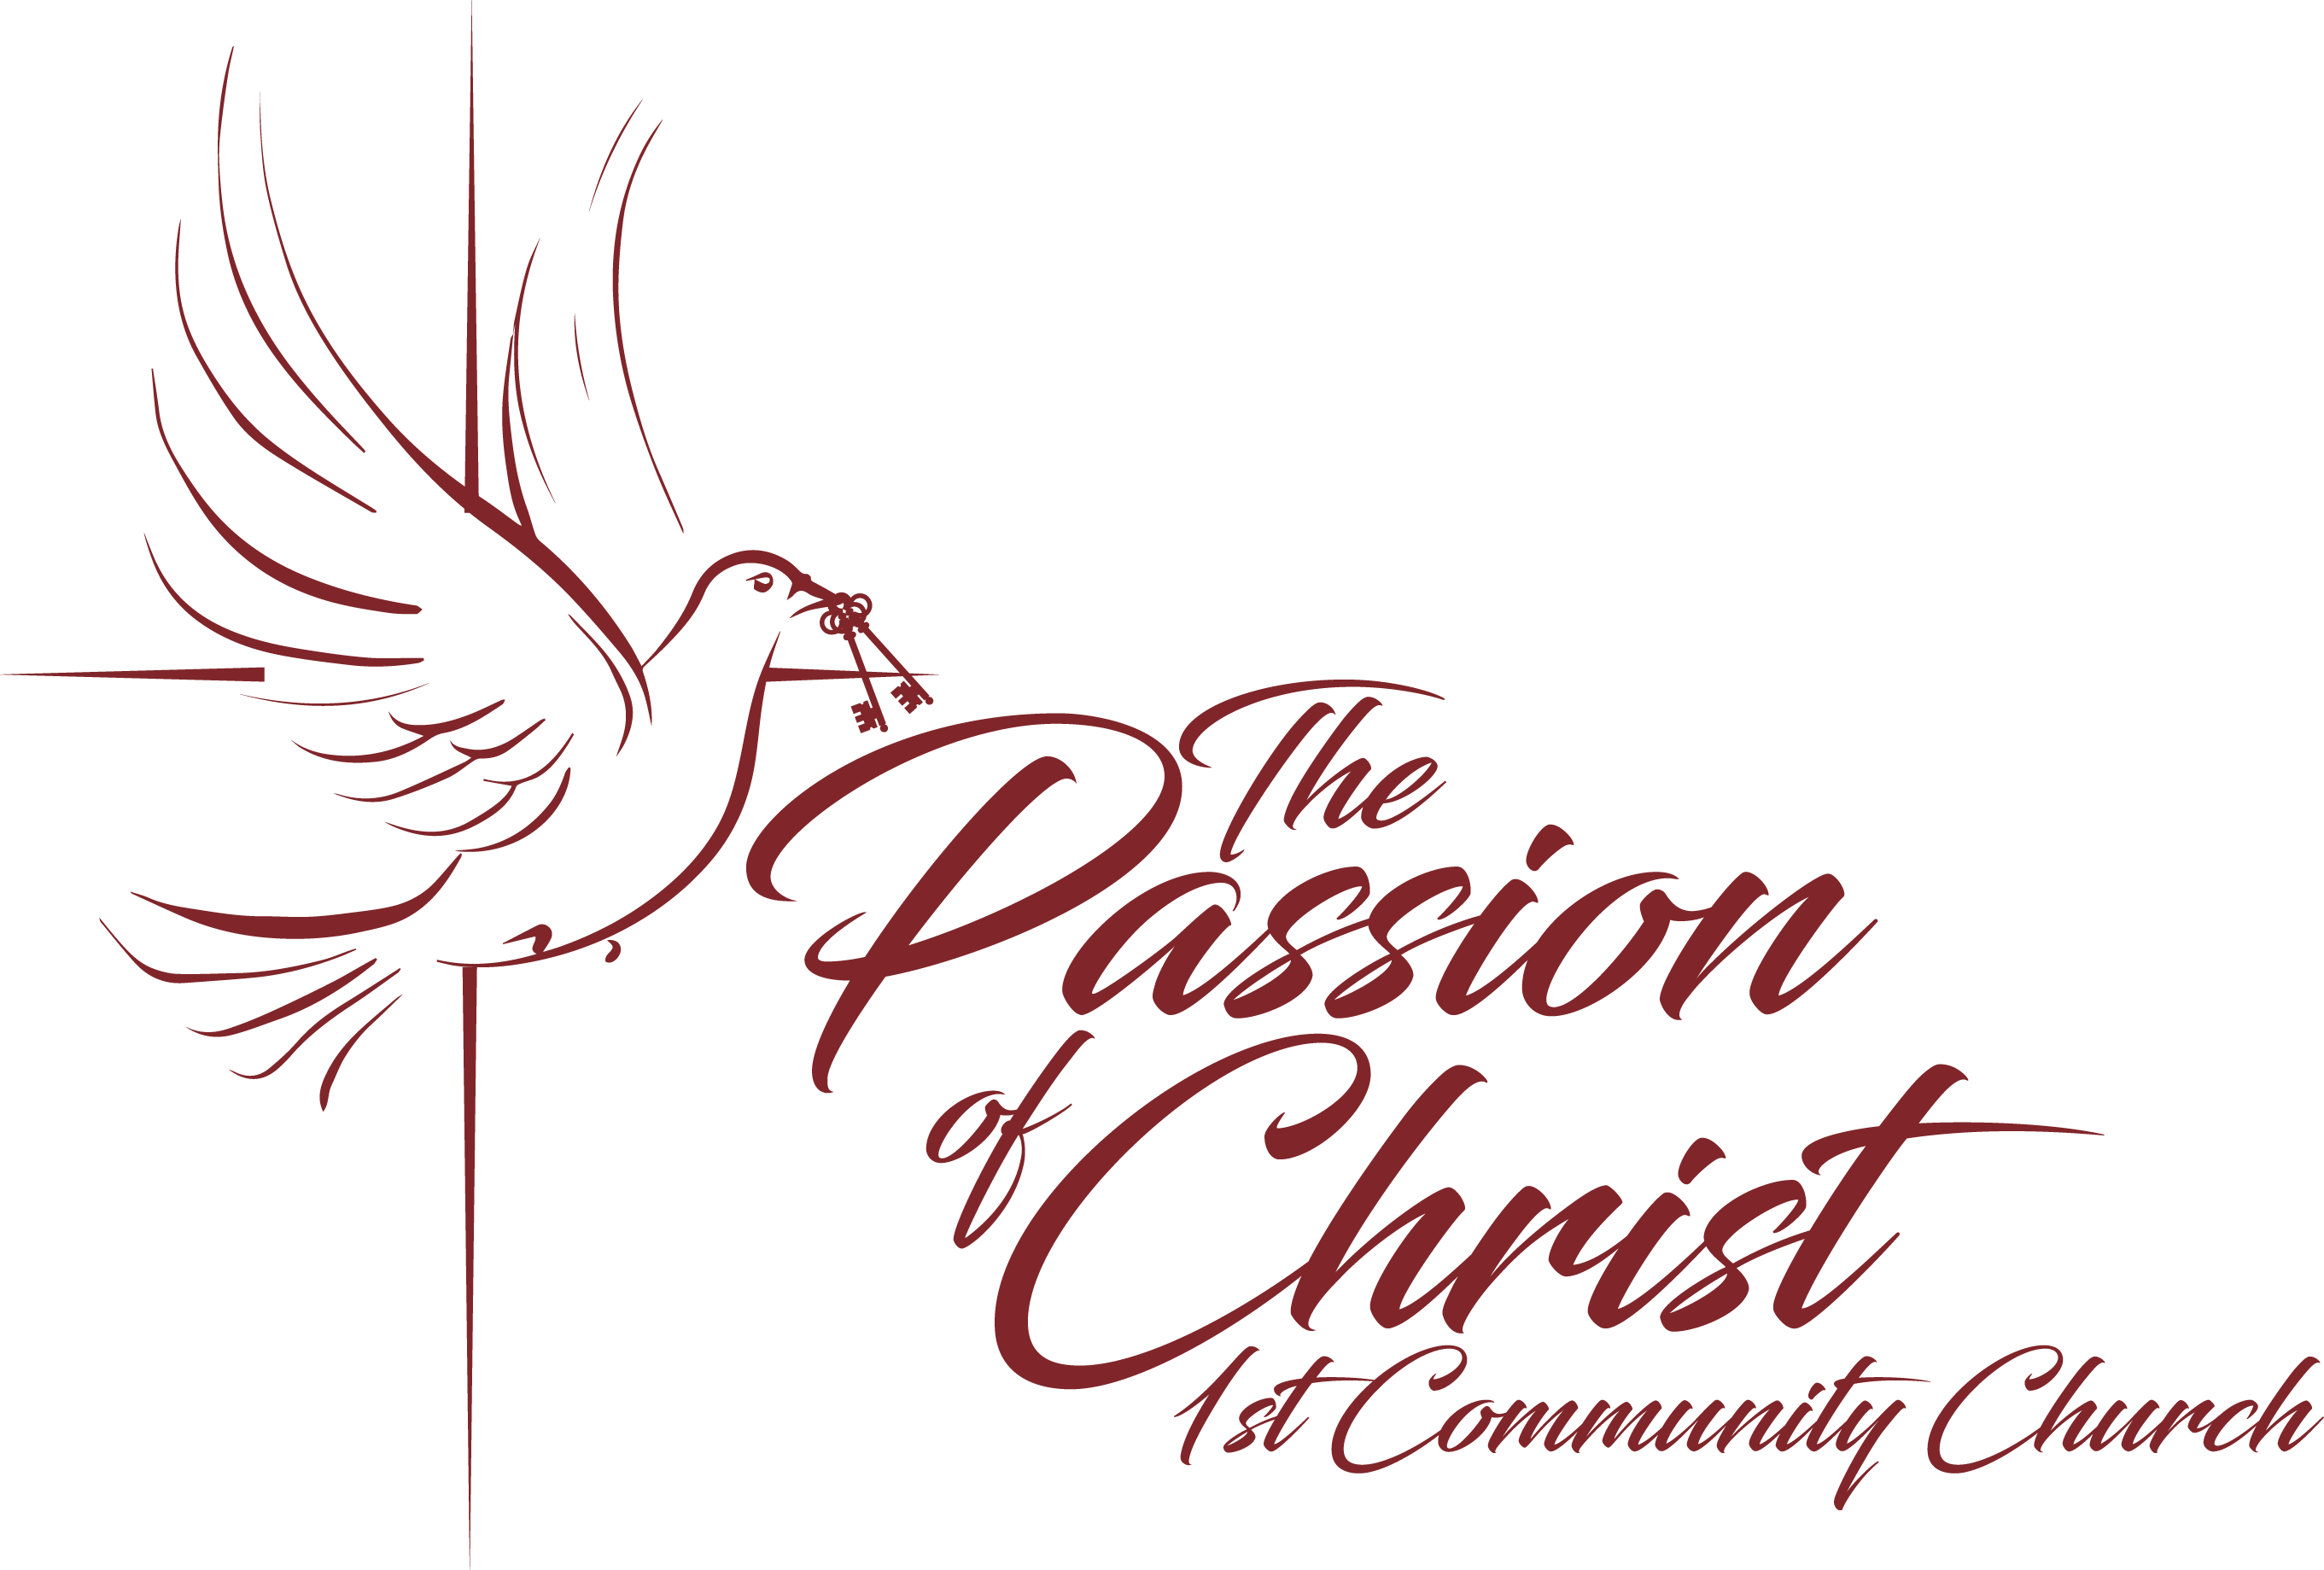 The Passion of Christ 1st Community Church